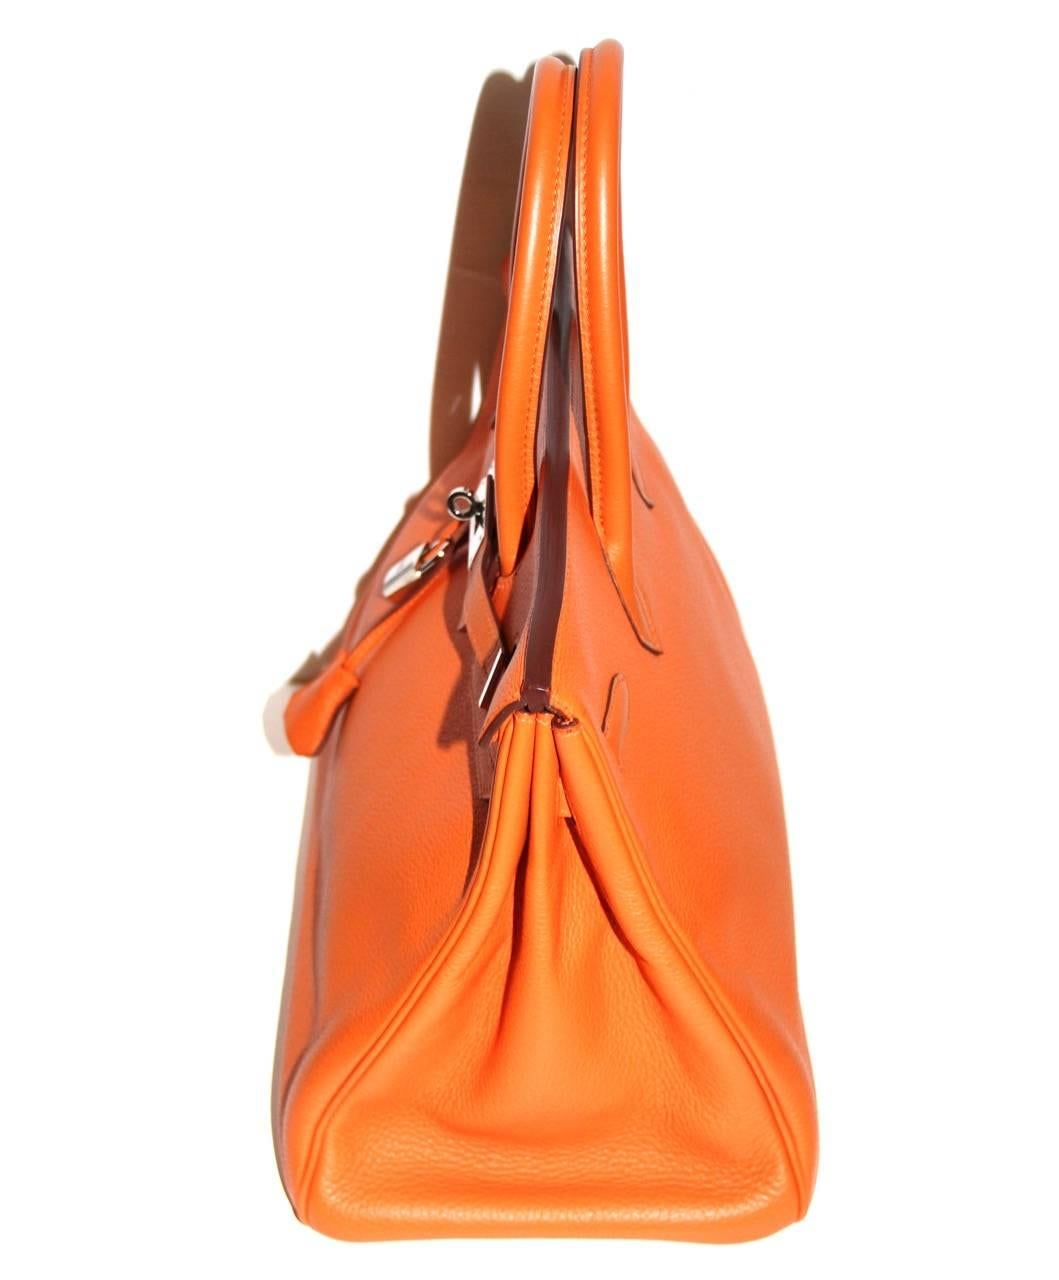 Orange Hermes is the most famous Hermes color.  This timeless bag is in excellent condition, like new.

Collection: 2003
Leather: Togo
Color: Orange
Hardware: Palladium
Interior: One slit pocket, one zip pocket; orange
Measurements: 35cm